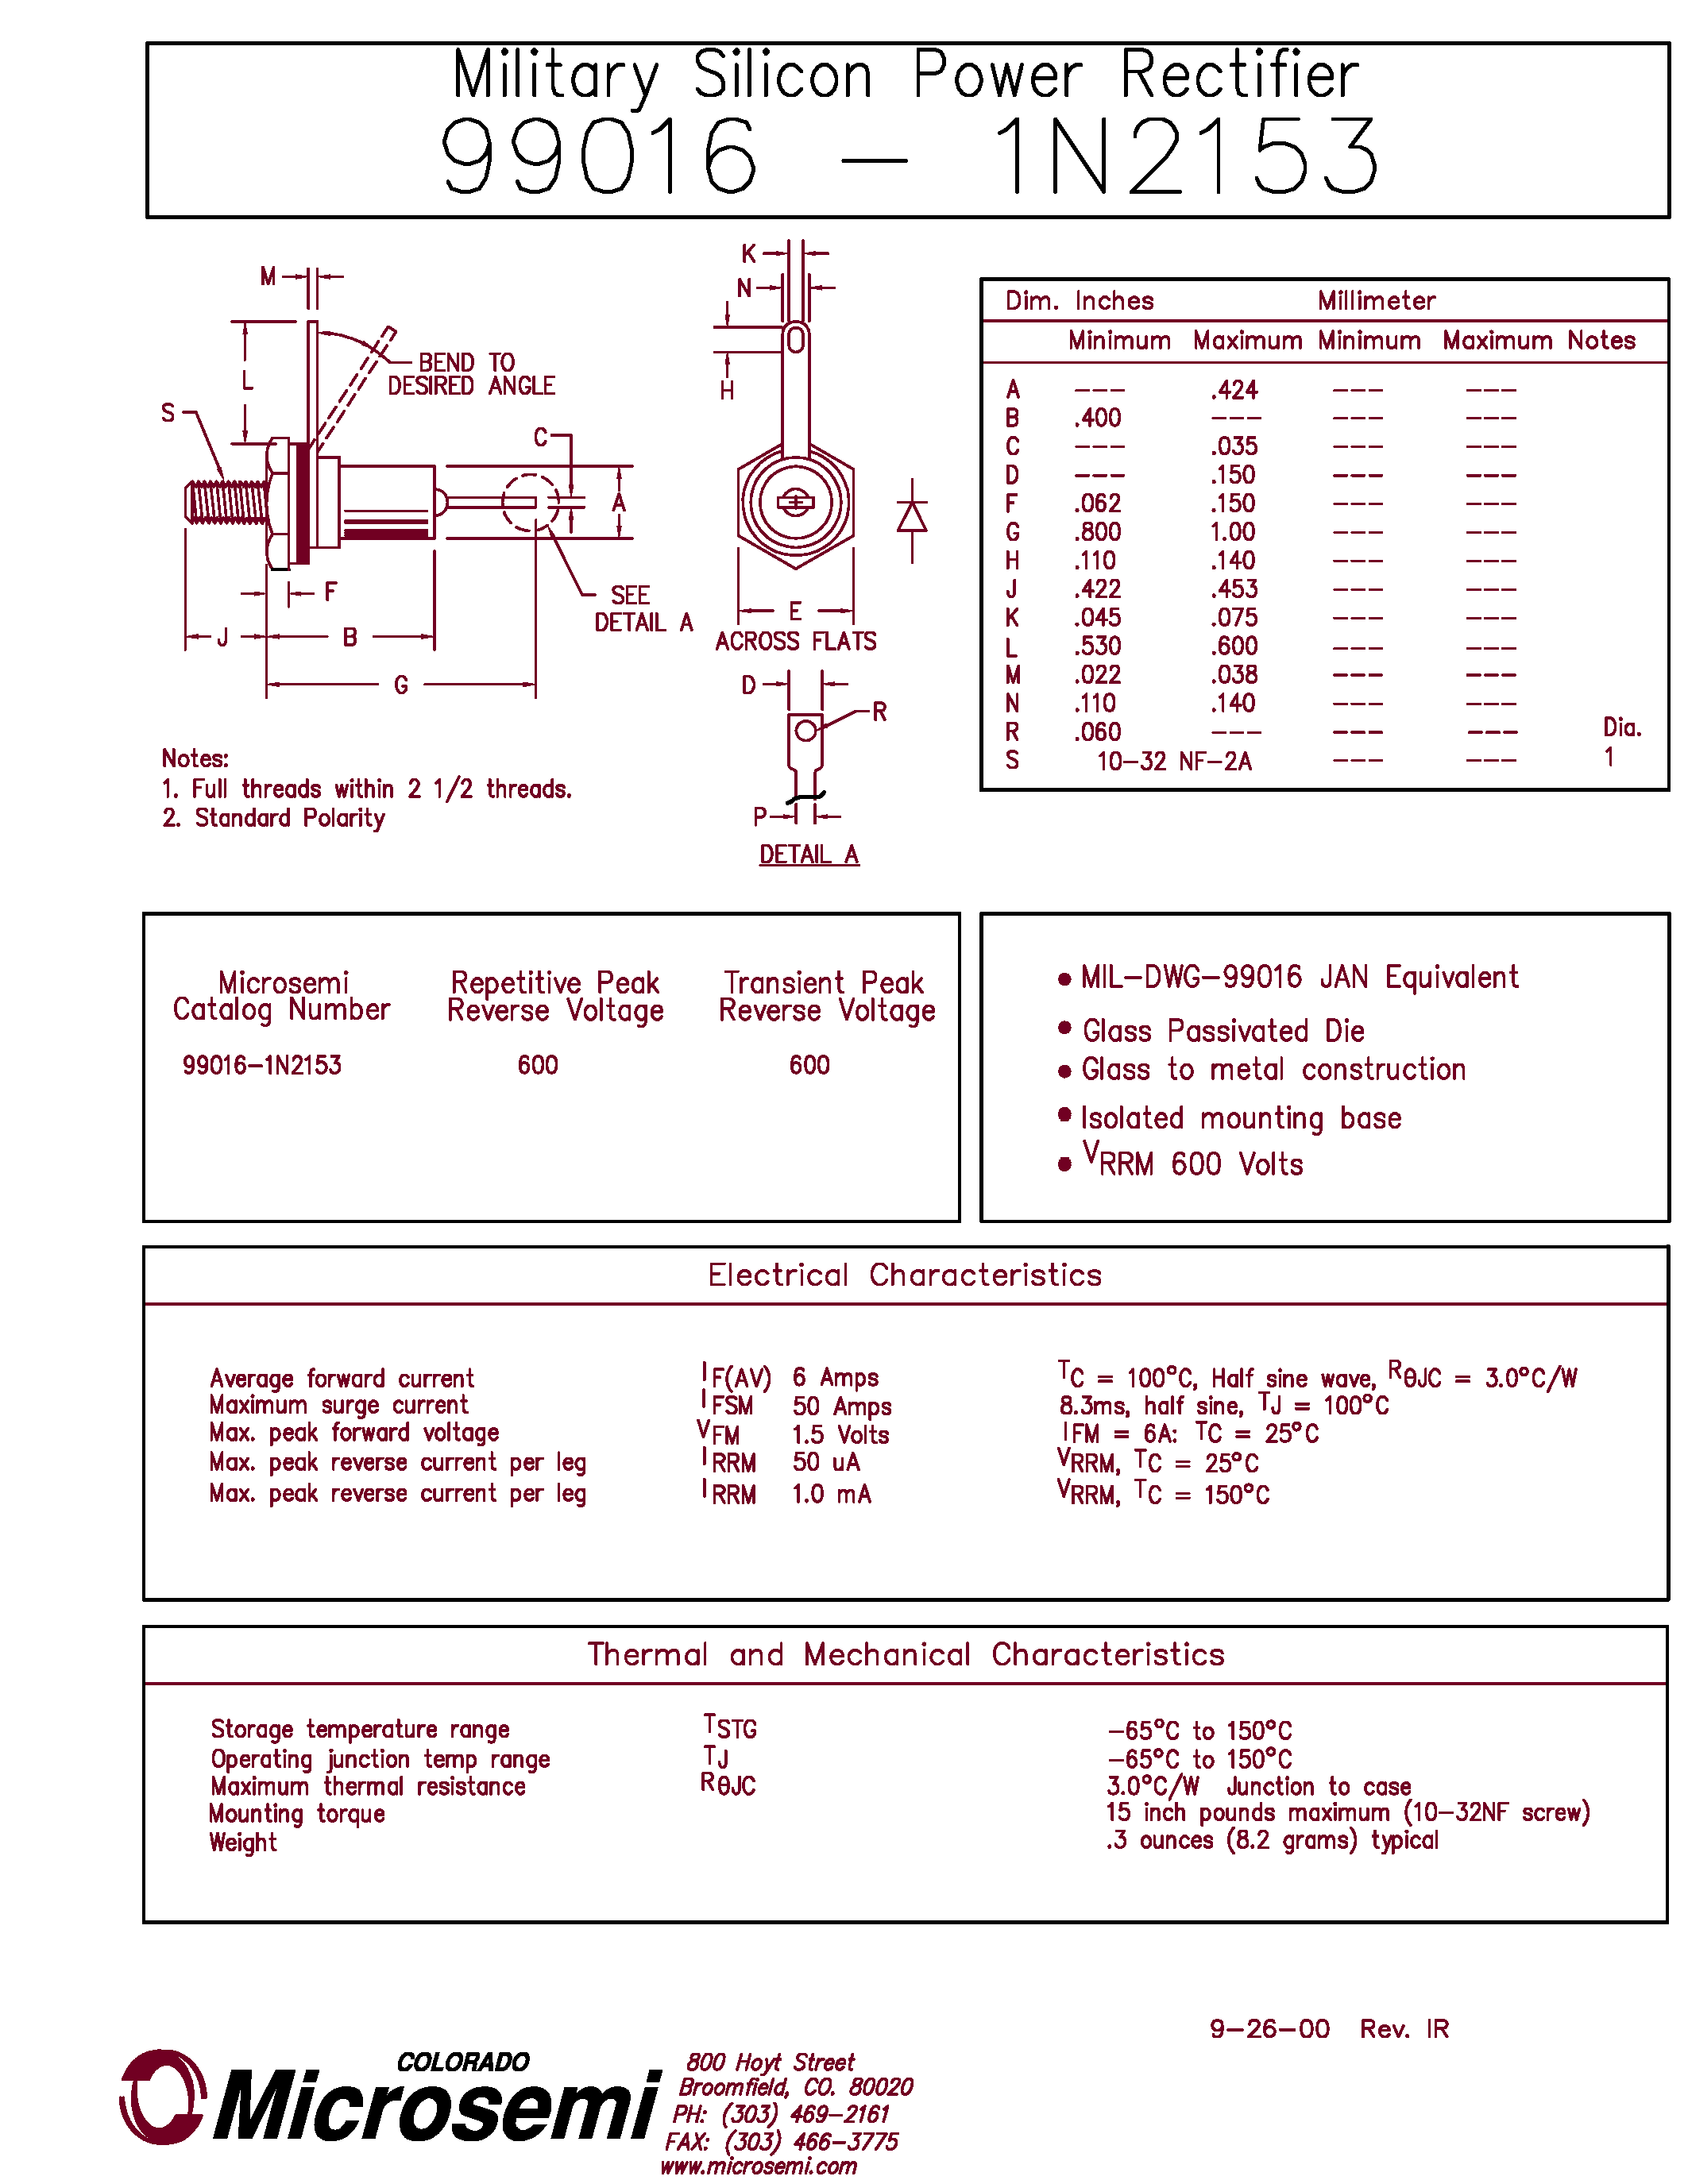 Datasheet 99016-1N2153 - Military Silicon Power Rectifier page 1